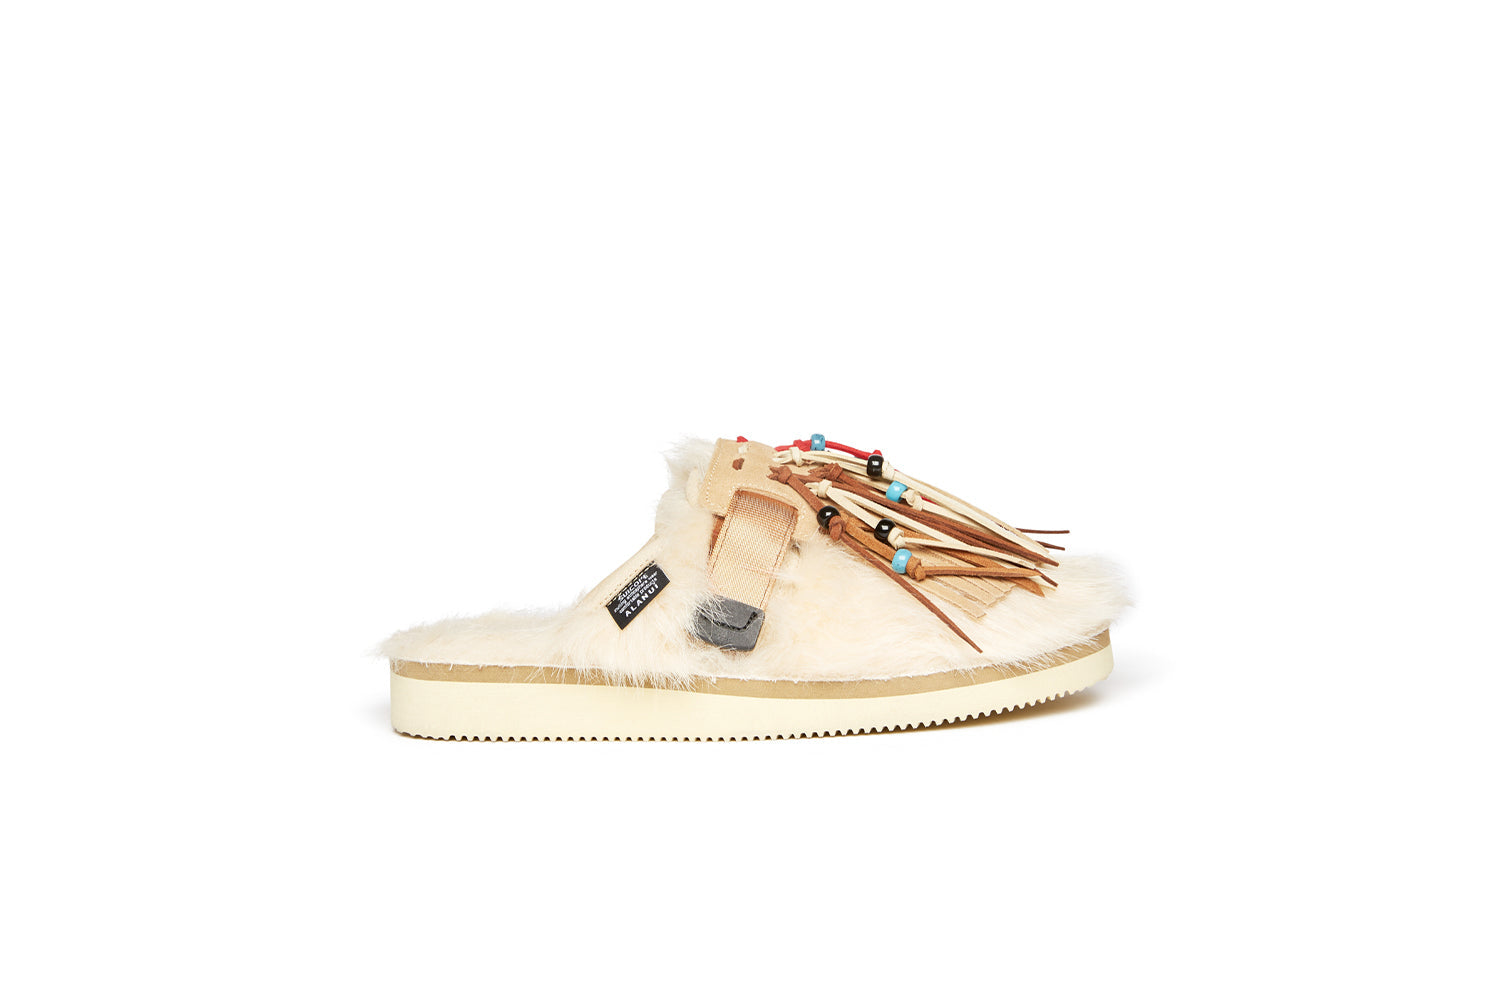 Alanui edition SUICOKE Zavo closed toe slides with ivory colored fur on the upper and footbed. Includes a beige and ivory suede-beaded fringe that is a detachable piece from the singular nylon strap across the upper. From Fall/Winter 2021 collection on SUICOKE Official US & Canada Webstore.